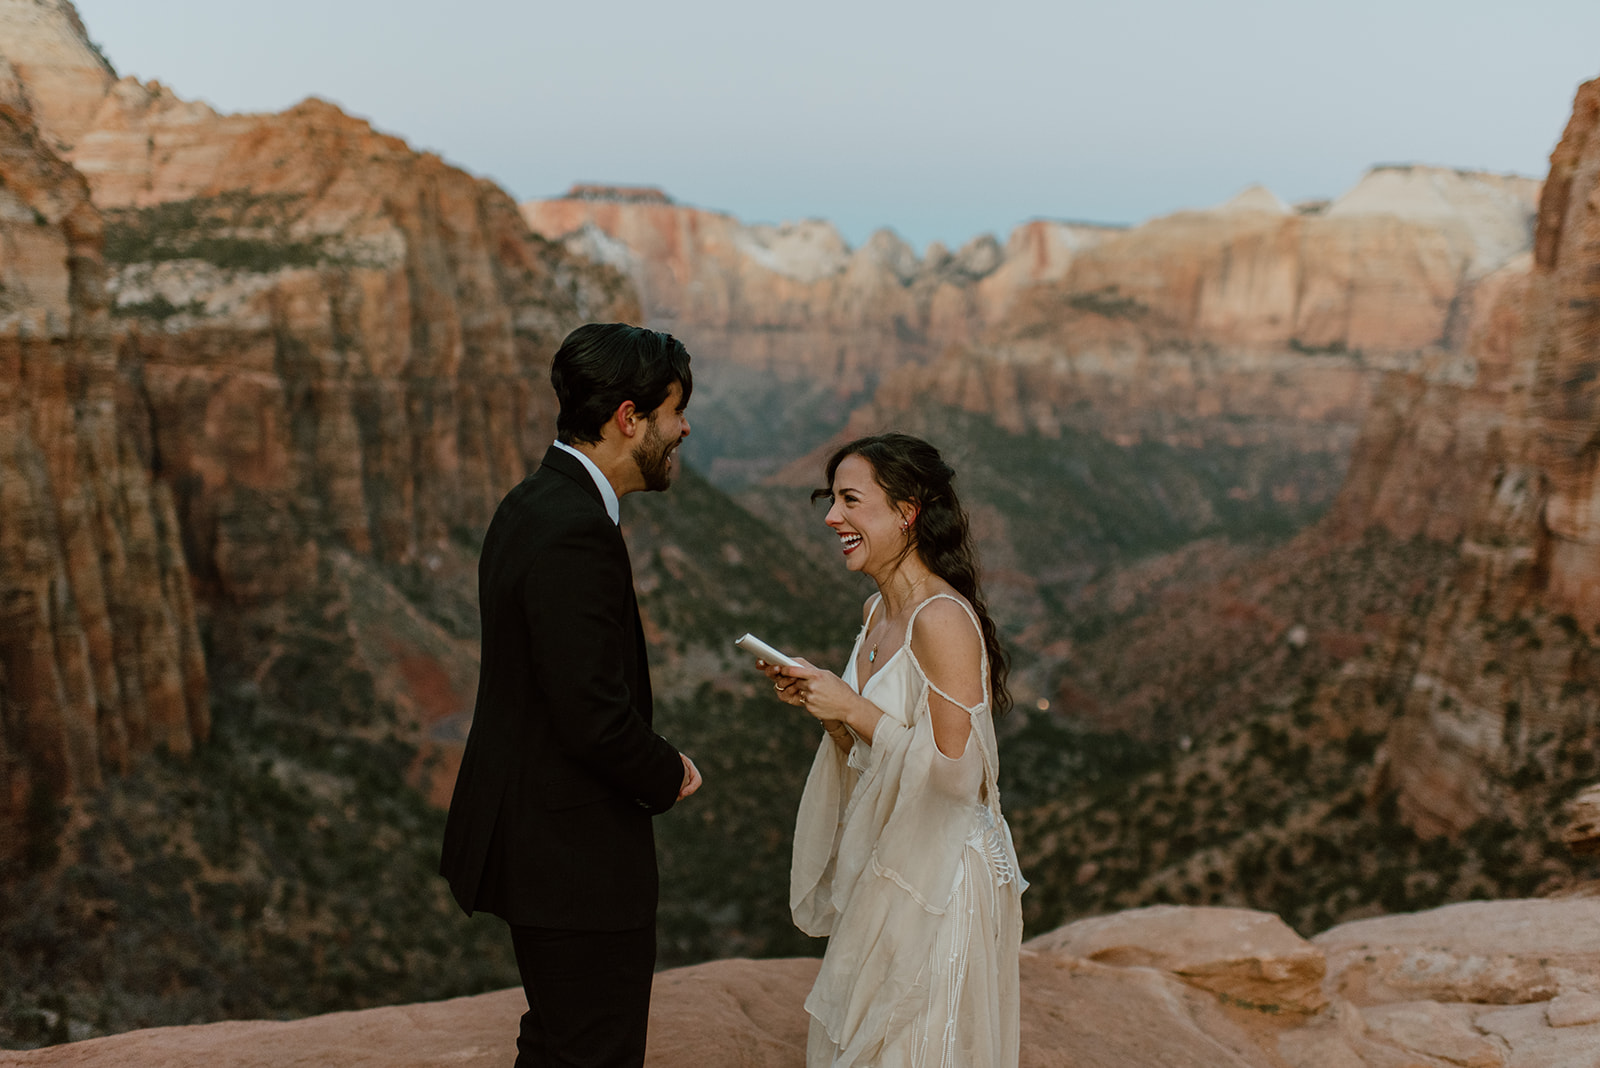 Couple exchanges vows at sunrise elopement in Zion National Park